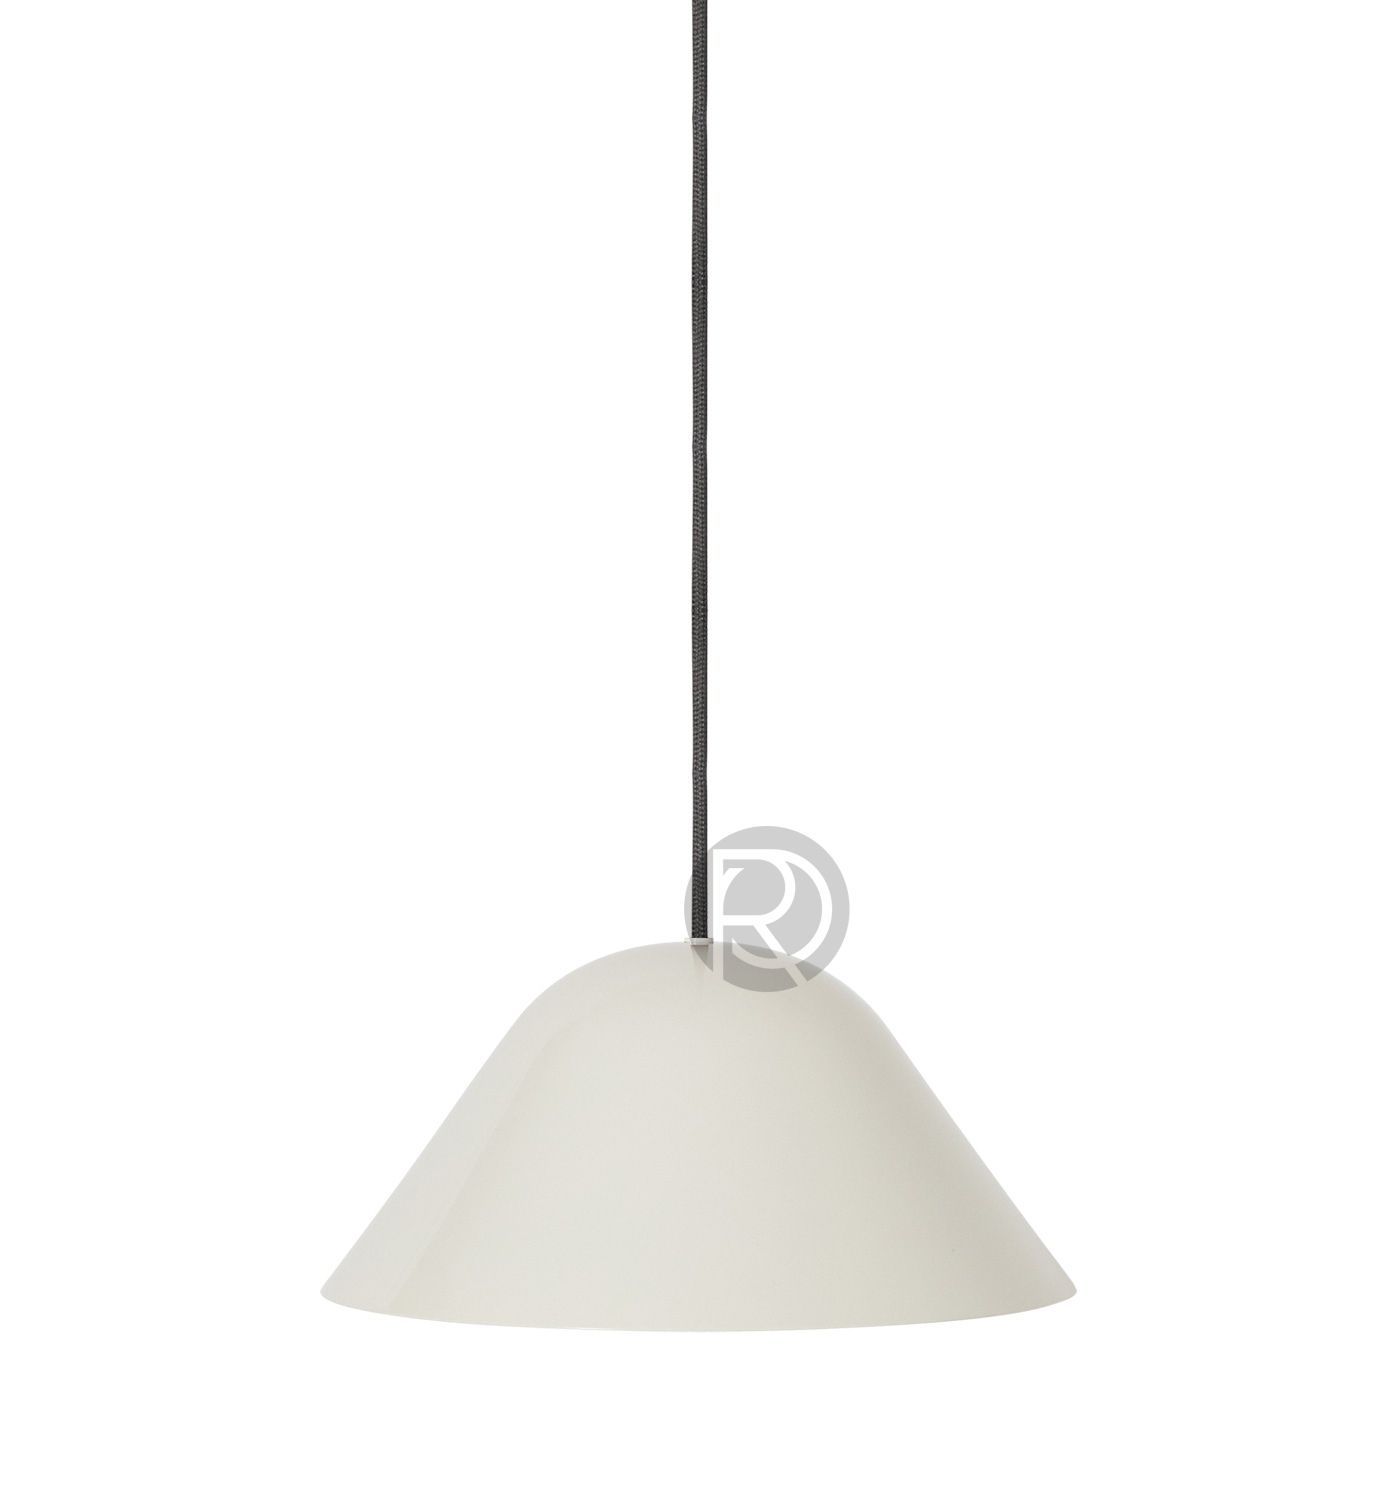 Pendant lamp CASSIS by RUBN